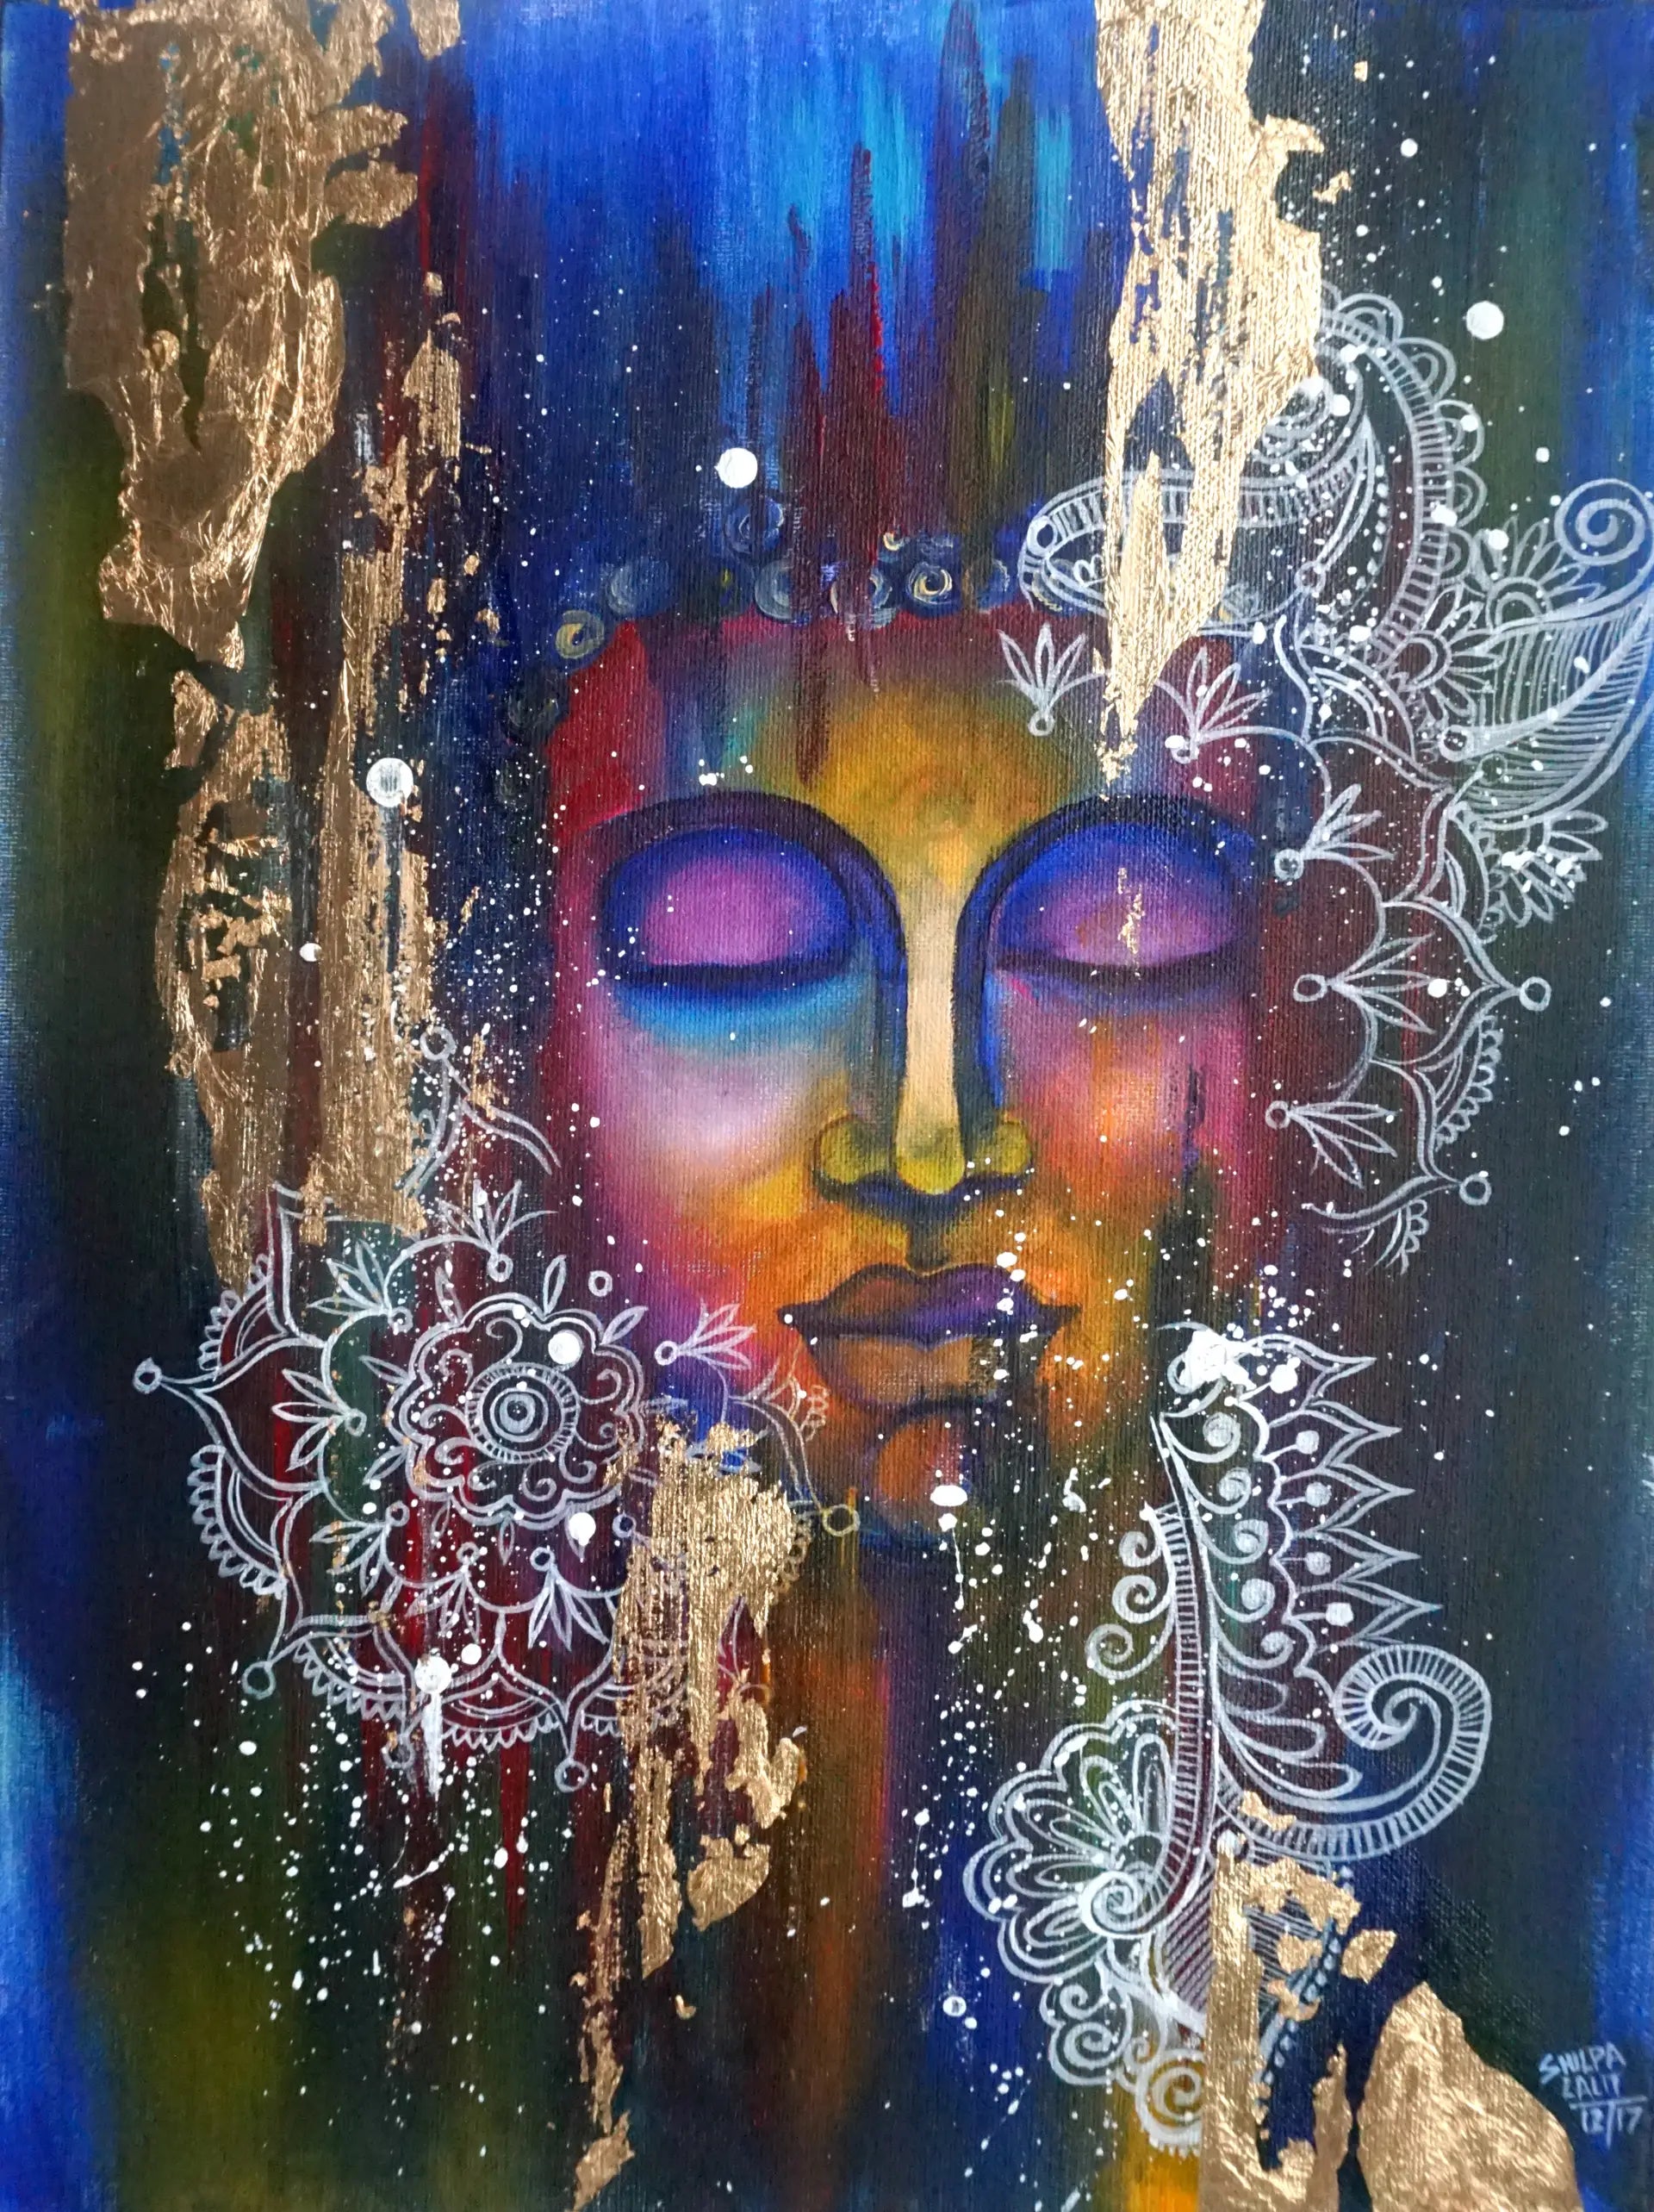 Golden Serenity: Learn to Paint a Meditating Buddha with Gold Leaf using Acrylics on Canvas